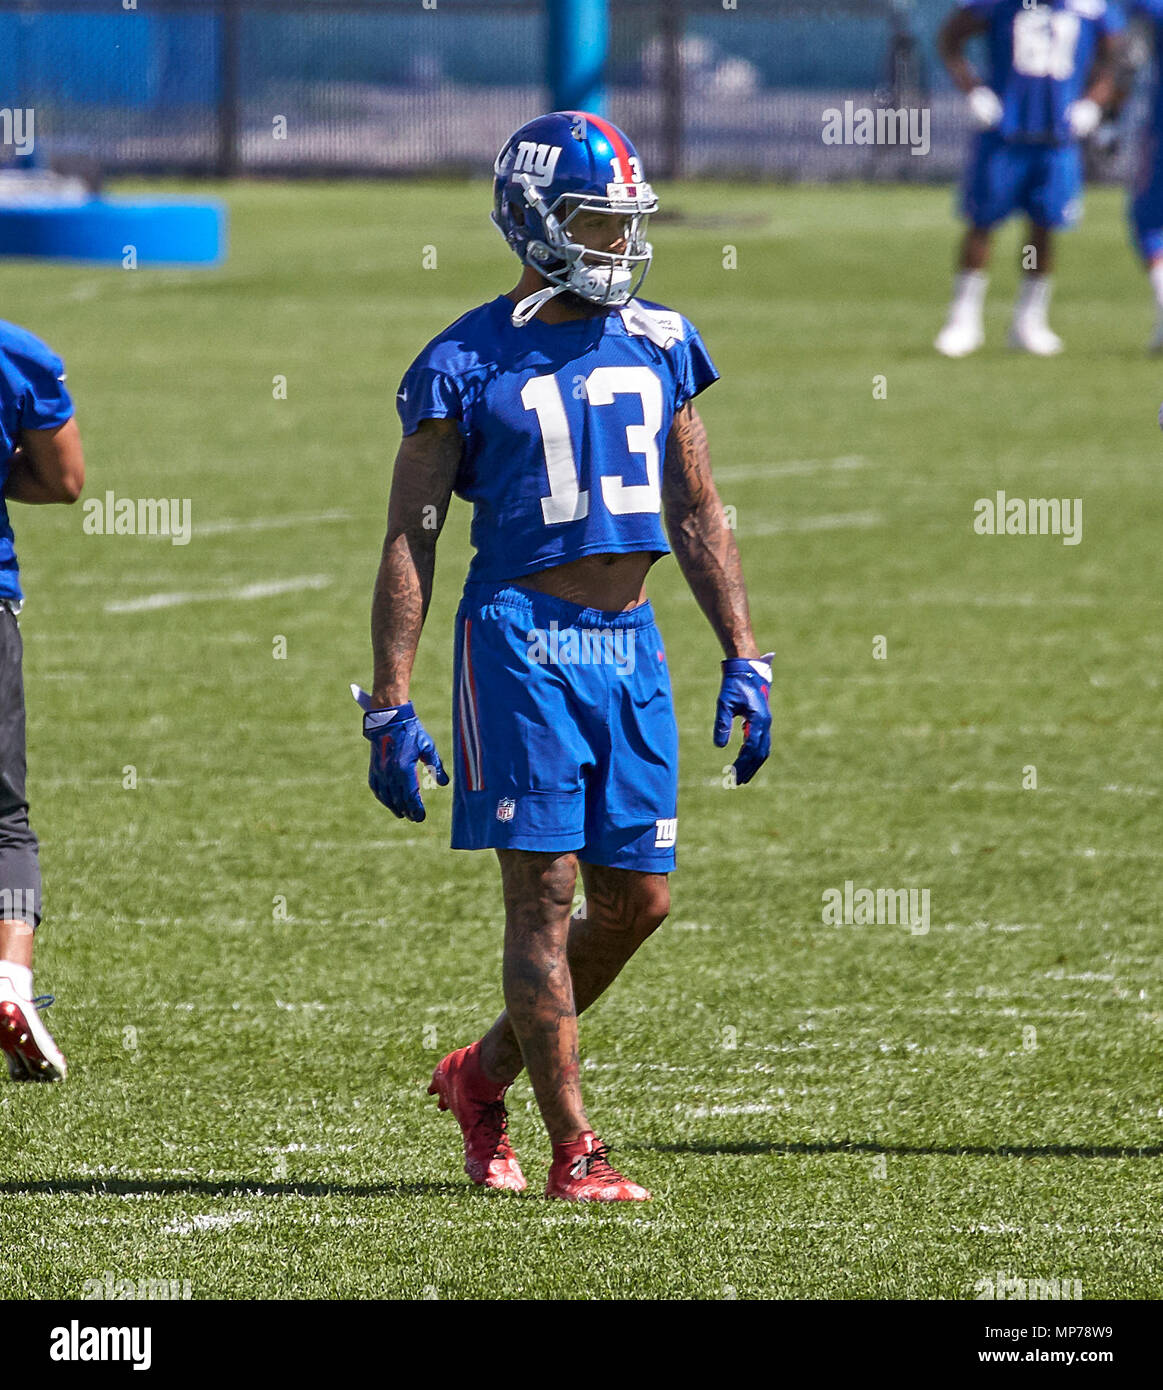 East Rutherford, New Jersey, USA. 21st May, 2018. New York Giants' wide  receiver Odell Beckham Jr (13) during organized team activities at the  Quest Diagnostics Training Center in East Rutherford, New Jersey.